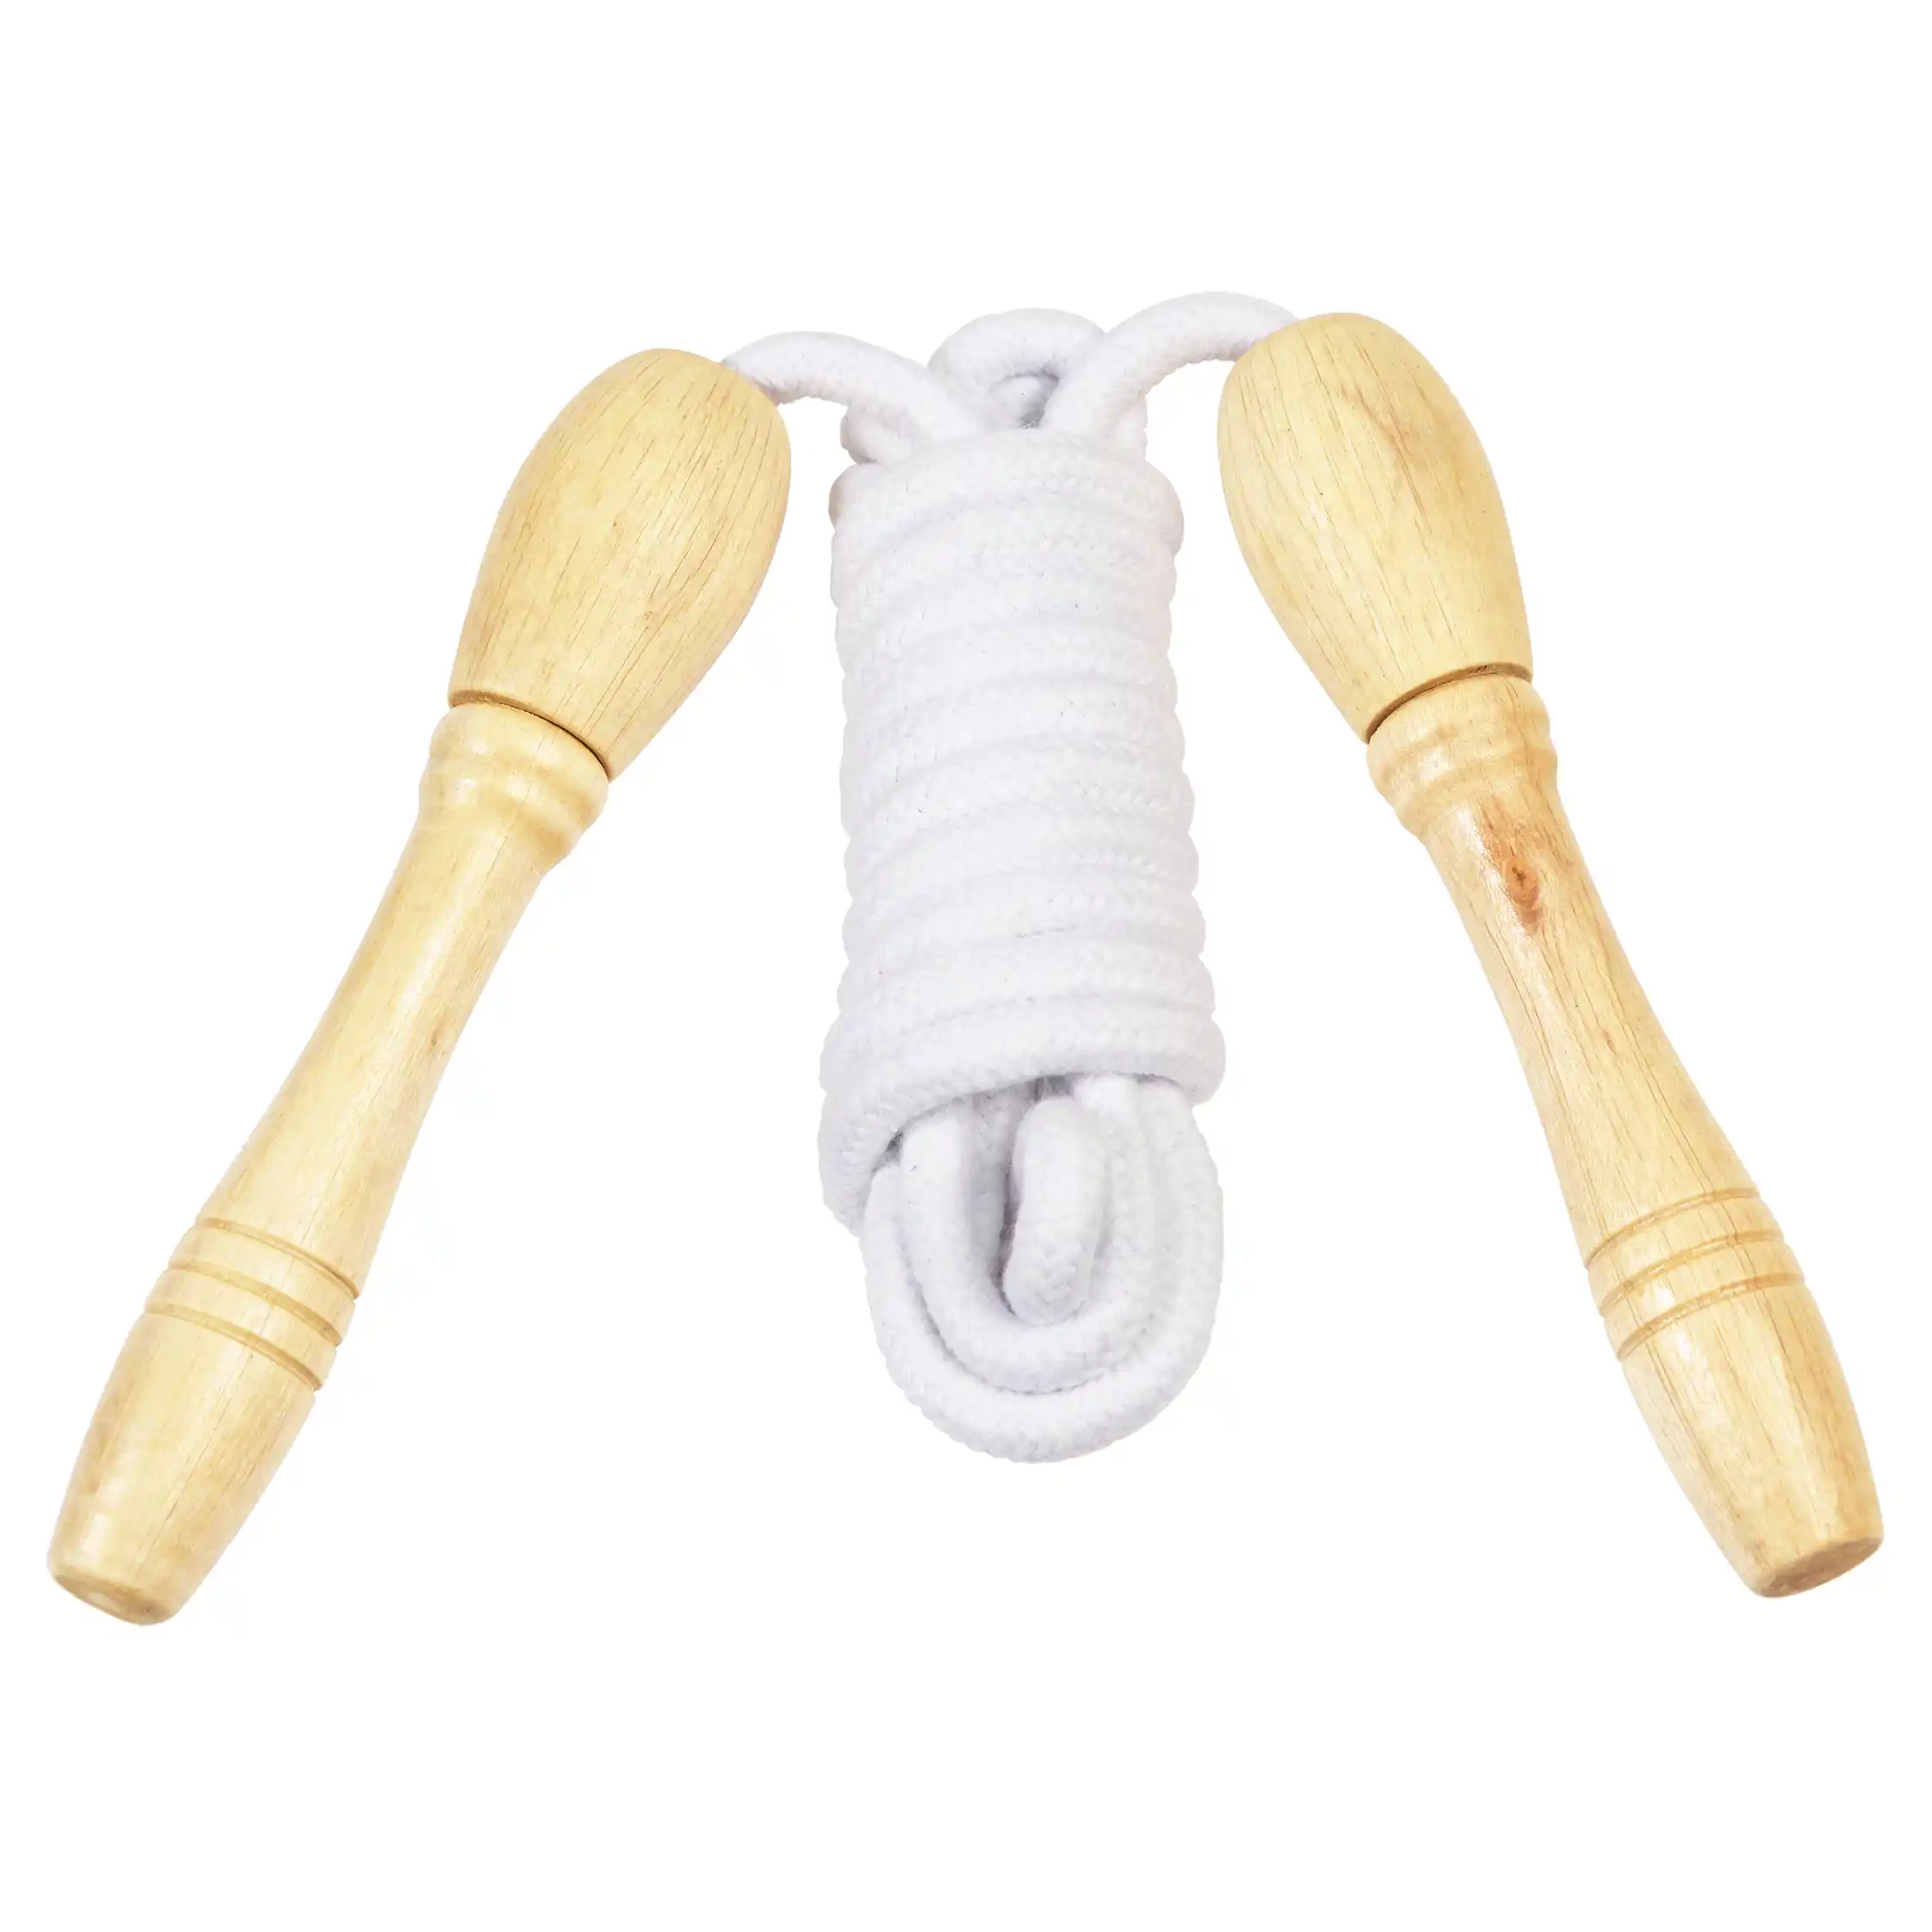 traditional skipping rope